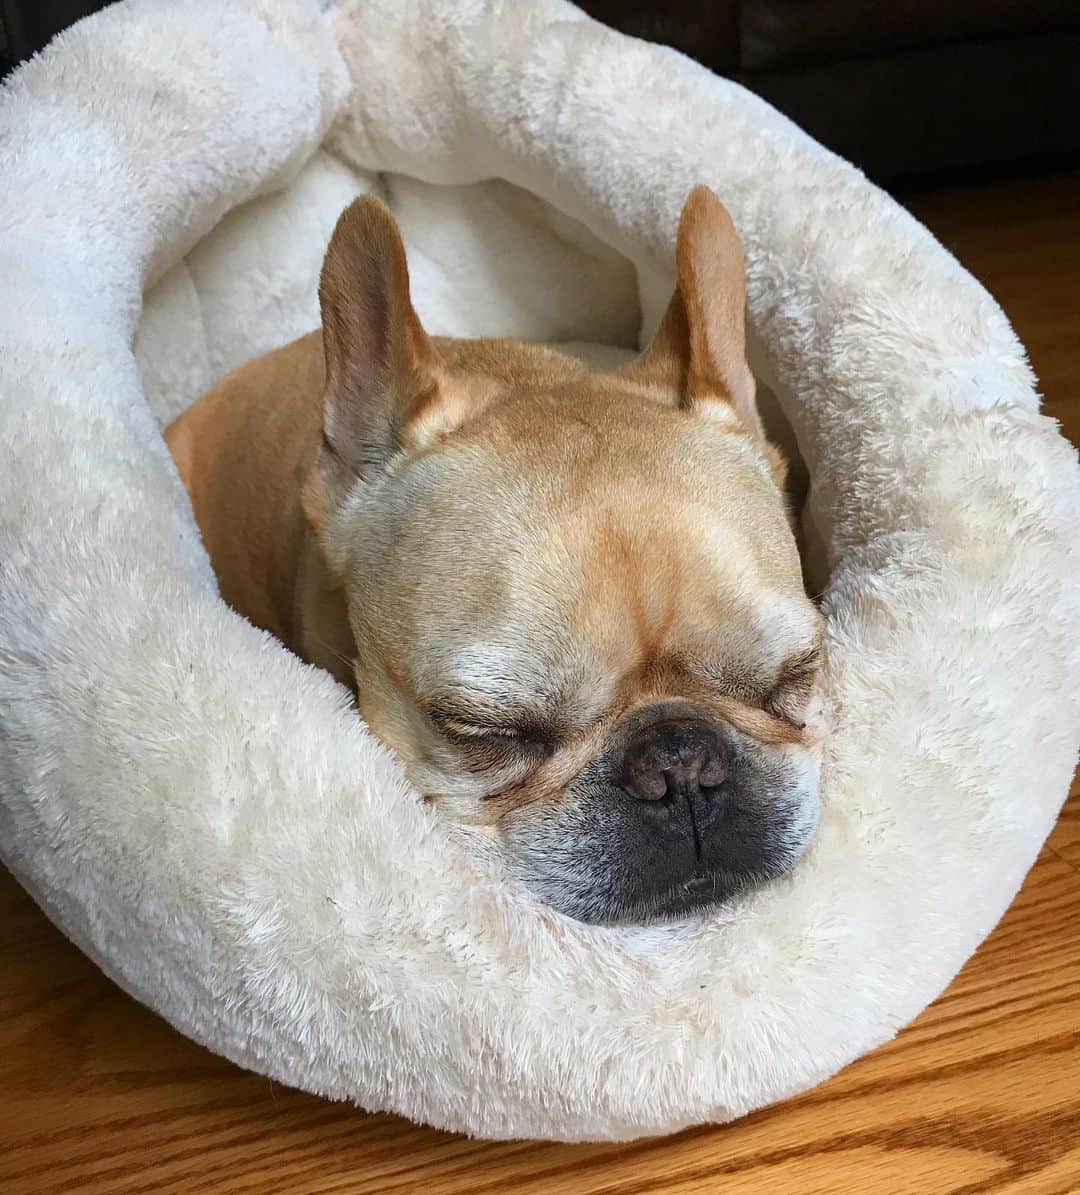 Hamlinのインスタグラム：「Sunday...great for sleeping in, what feels like, a ginormous plush headphone cushion. If I had to guess, probably the left cup. 😴 I wonder who’s sleeping in the right cup?!? 😳 ........ #sunday #nap」